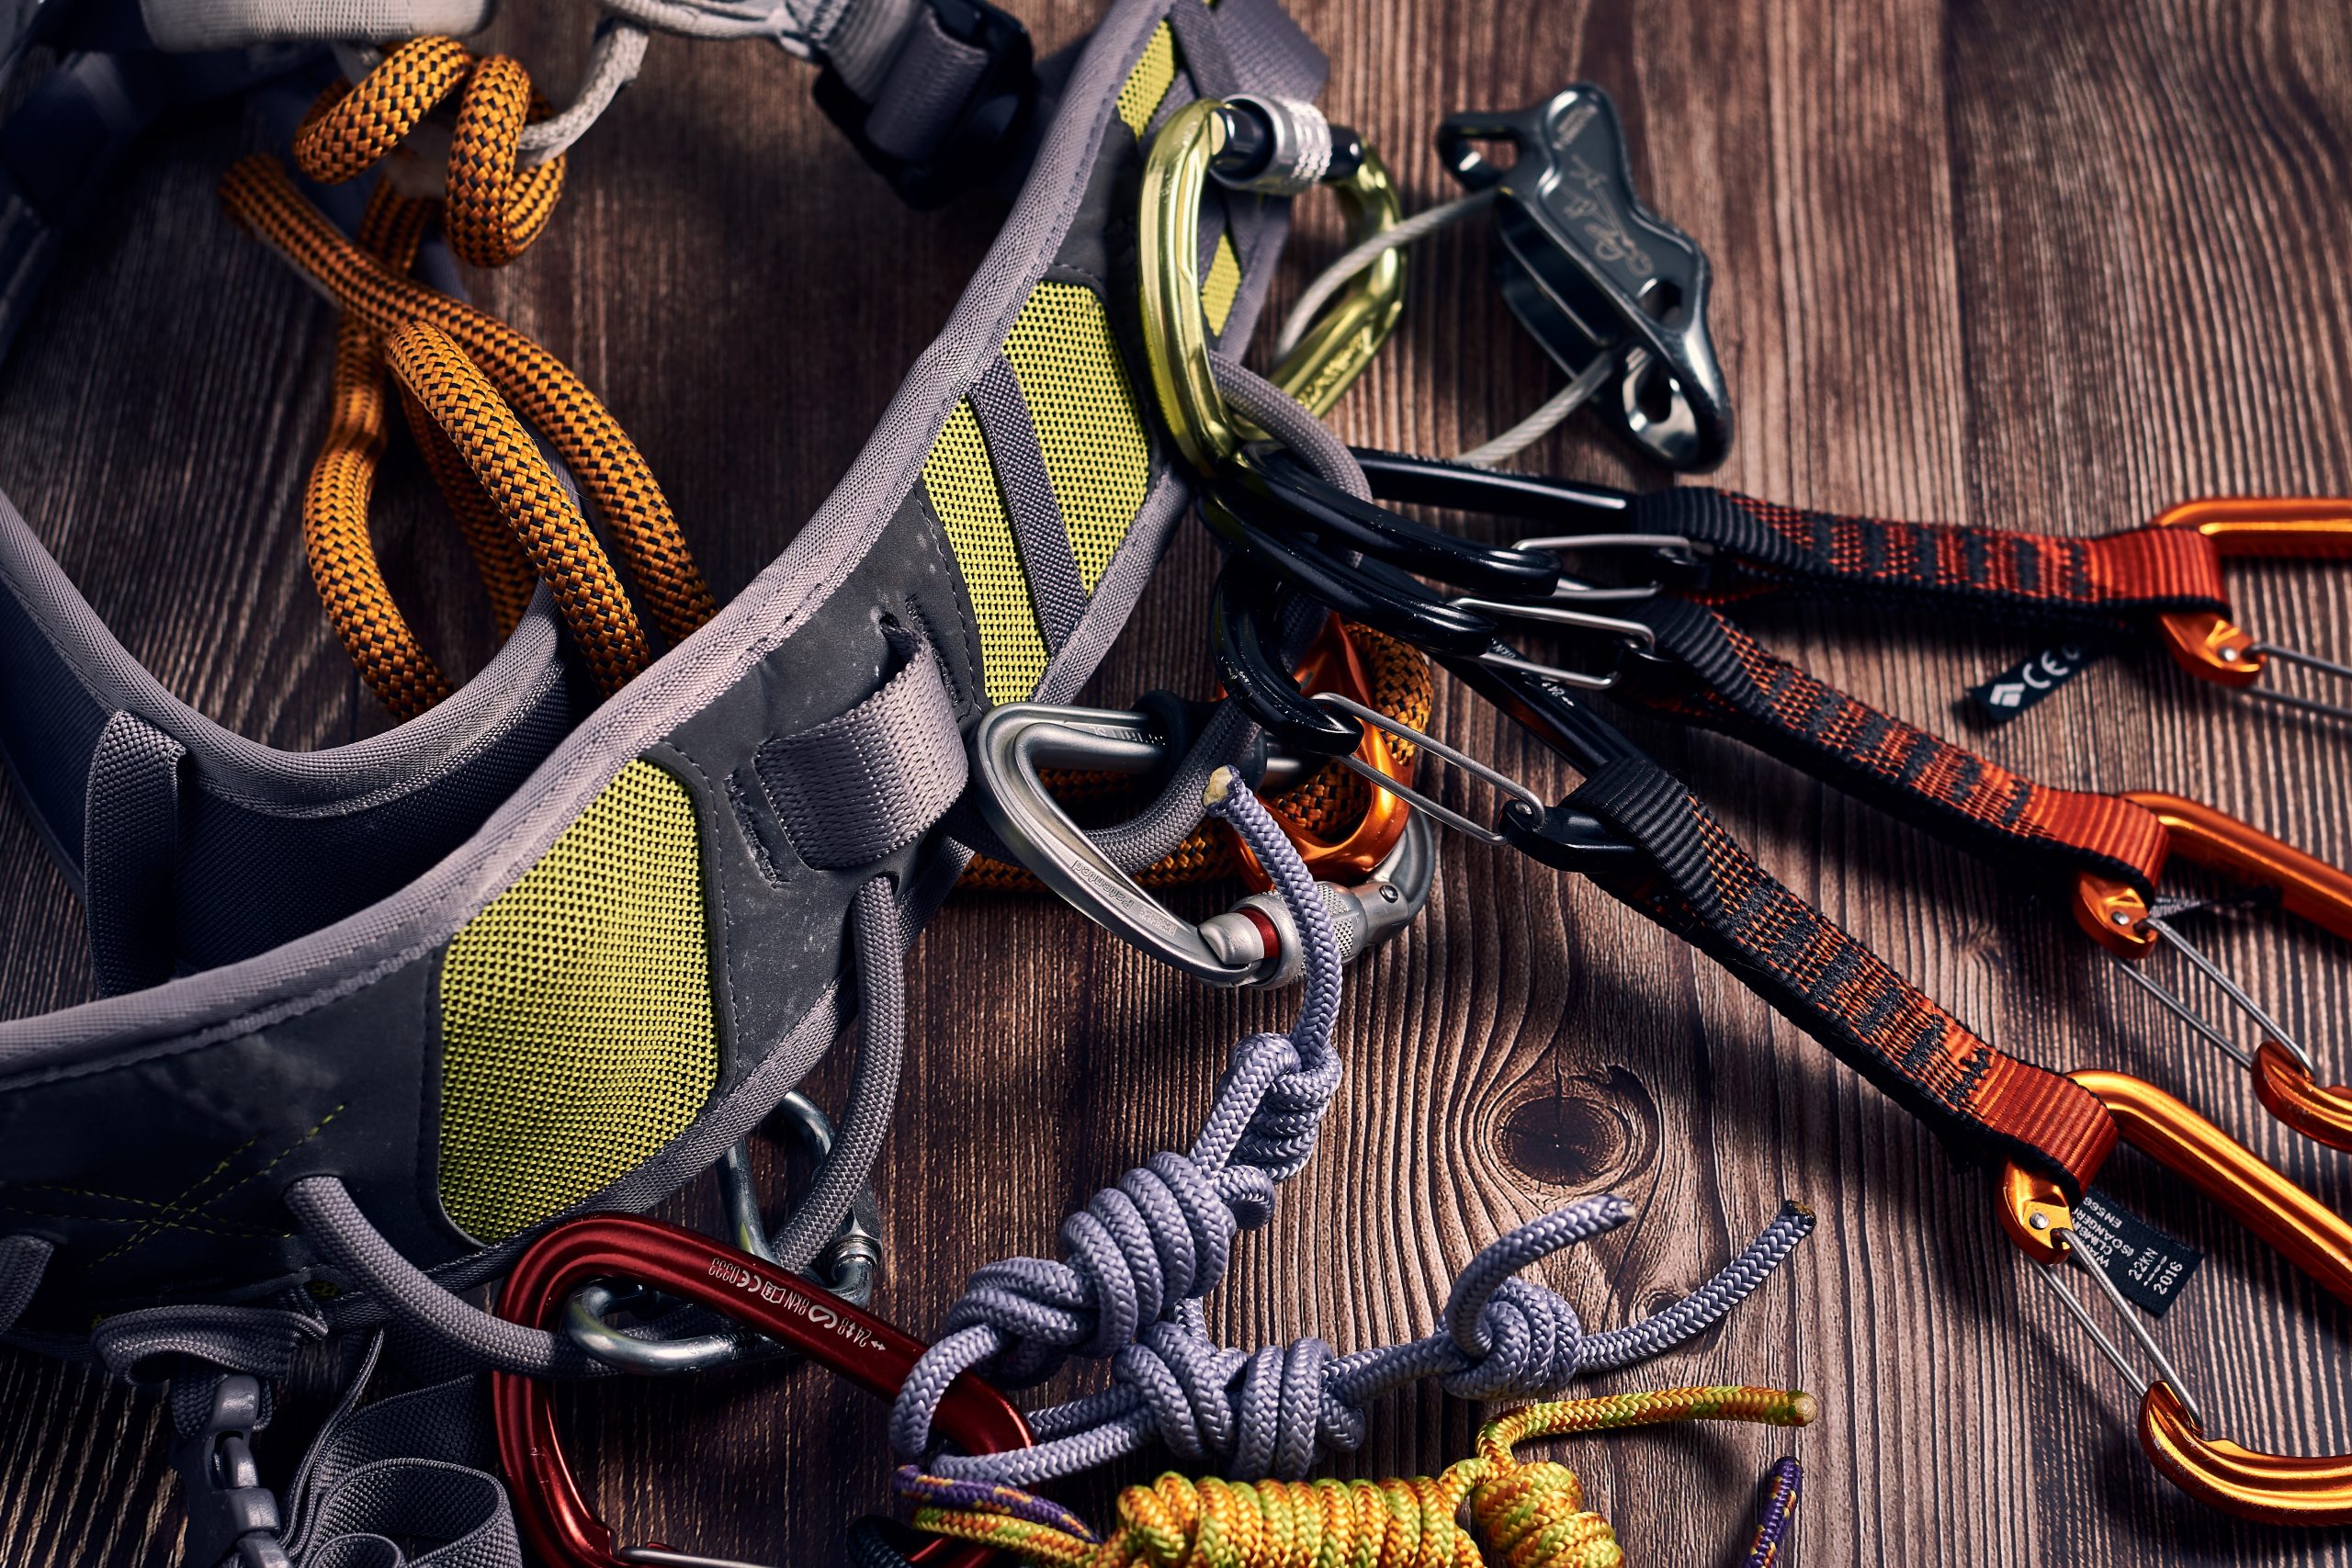 Climbing accessories – which ones to choose?